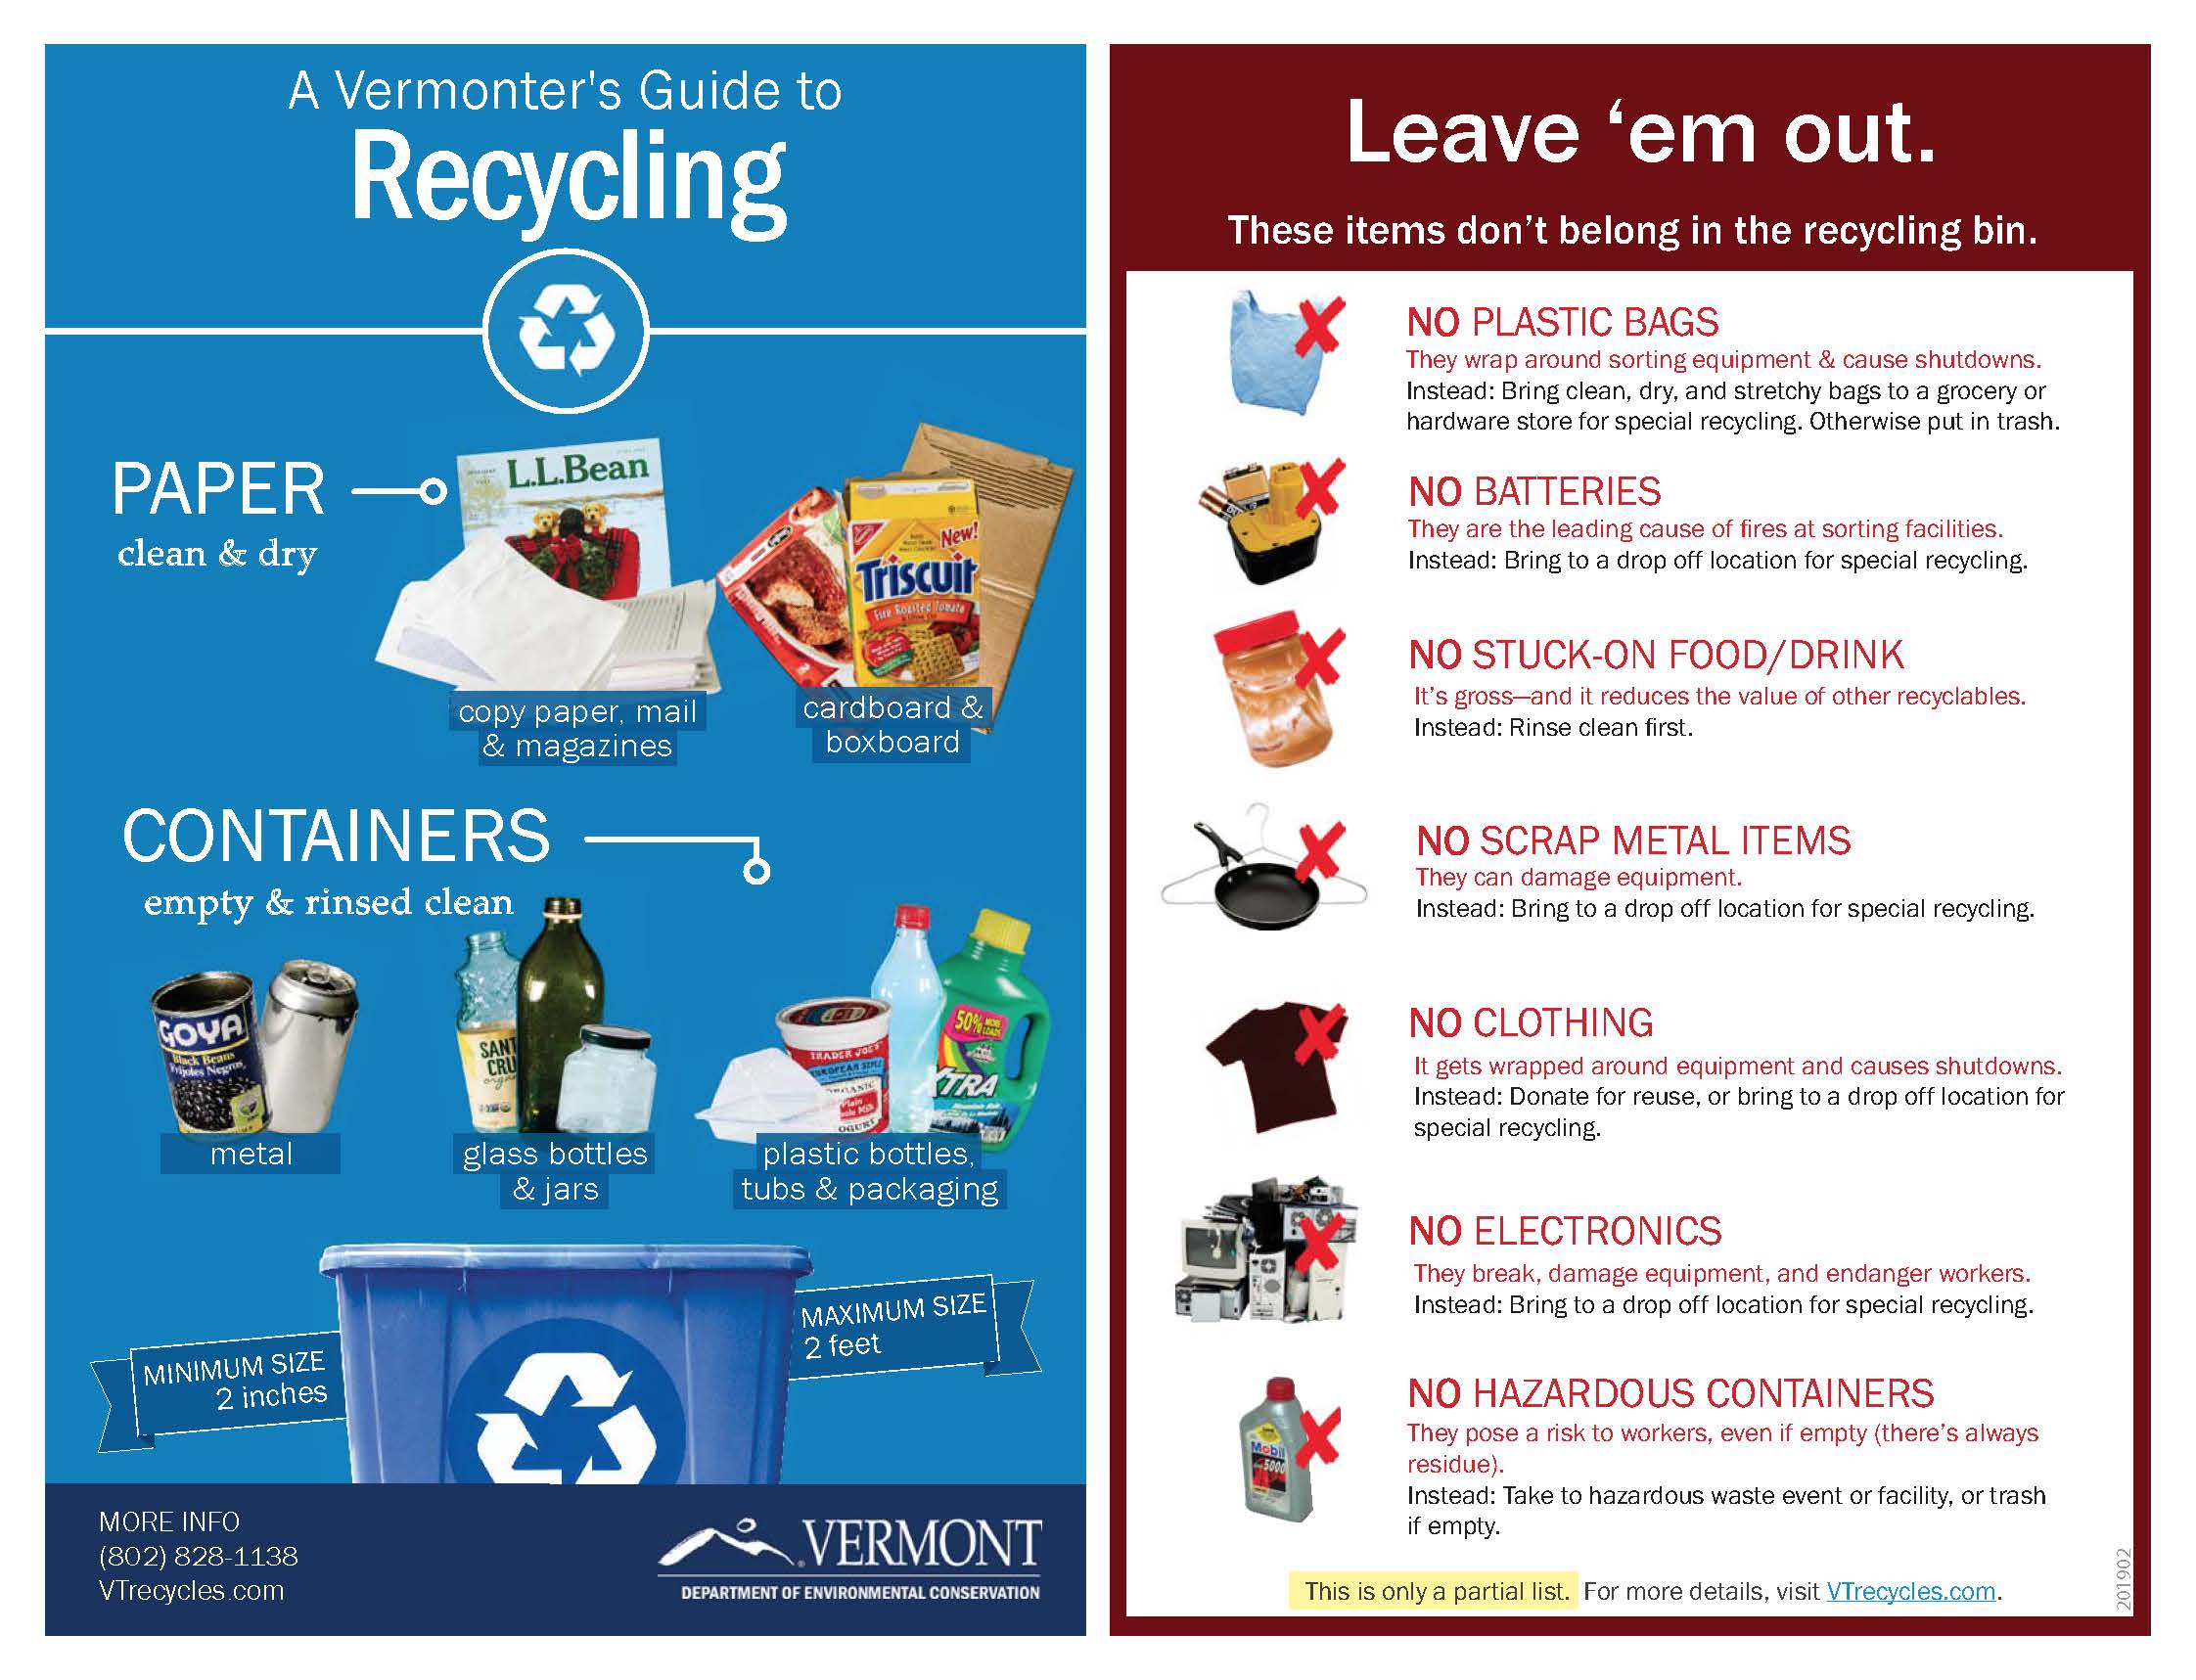 Vermonters Guide to Recycling